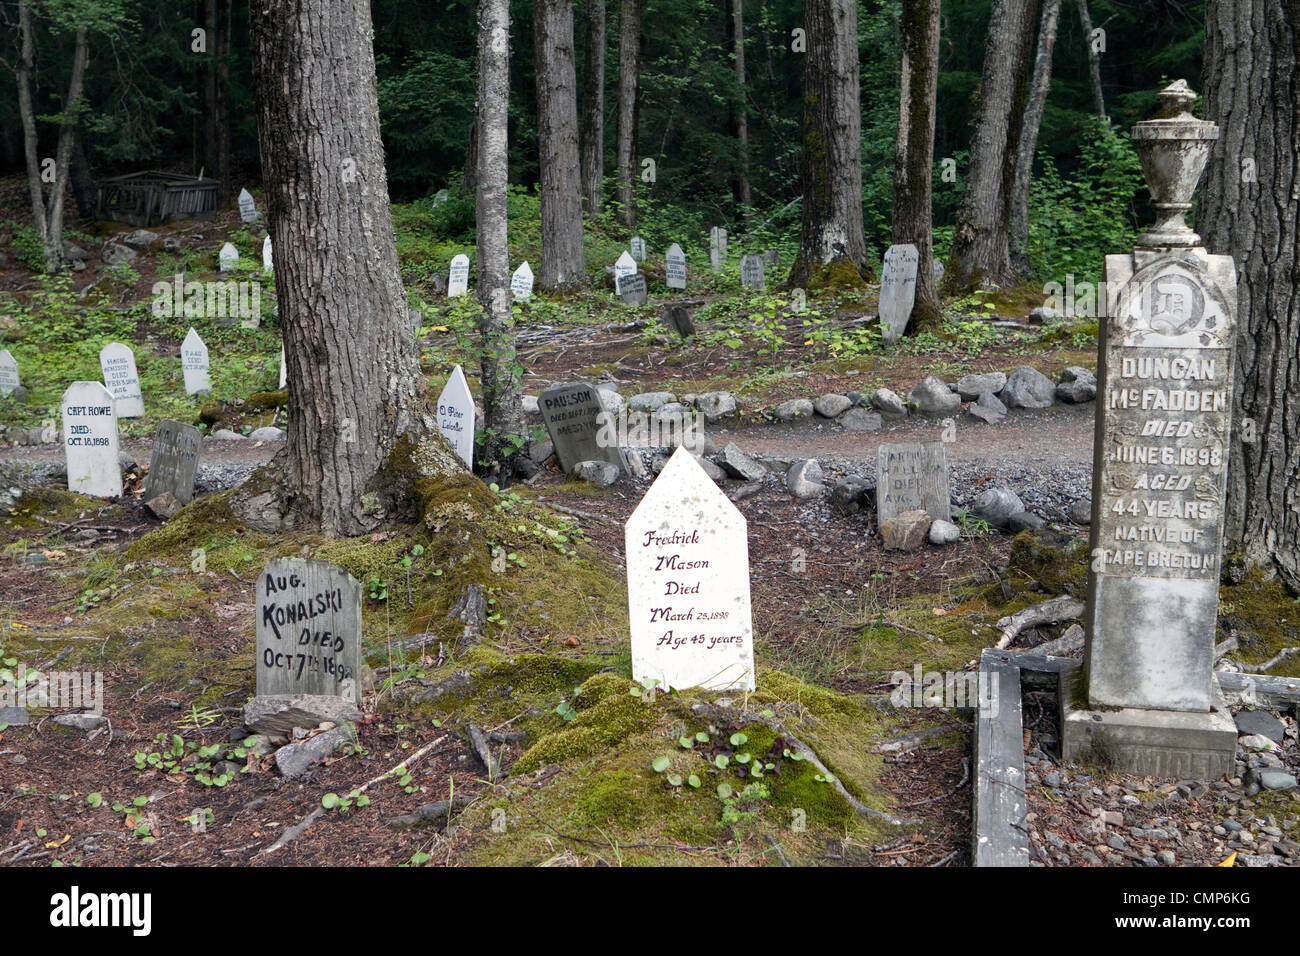 Cemetery at the Dyea town site in the Klondike Gold Rush National Historical Park near Skagway, Alaska, USA. Stock Photo